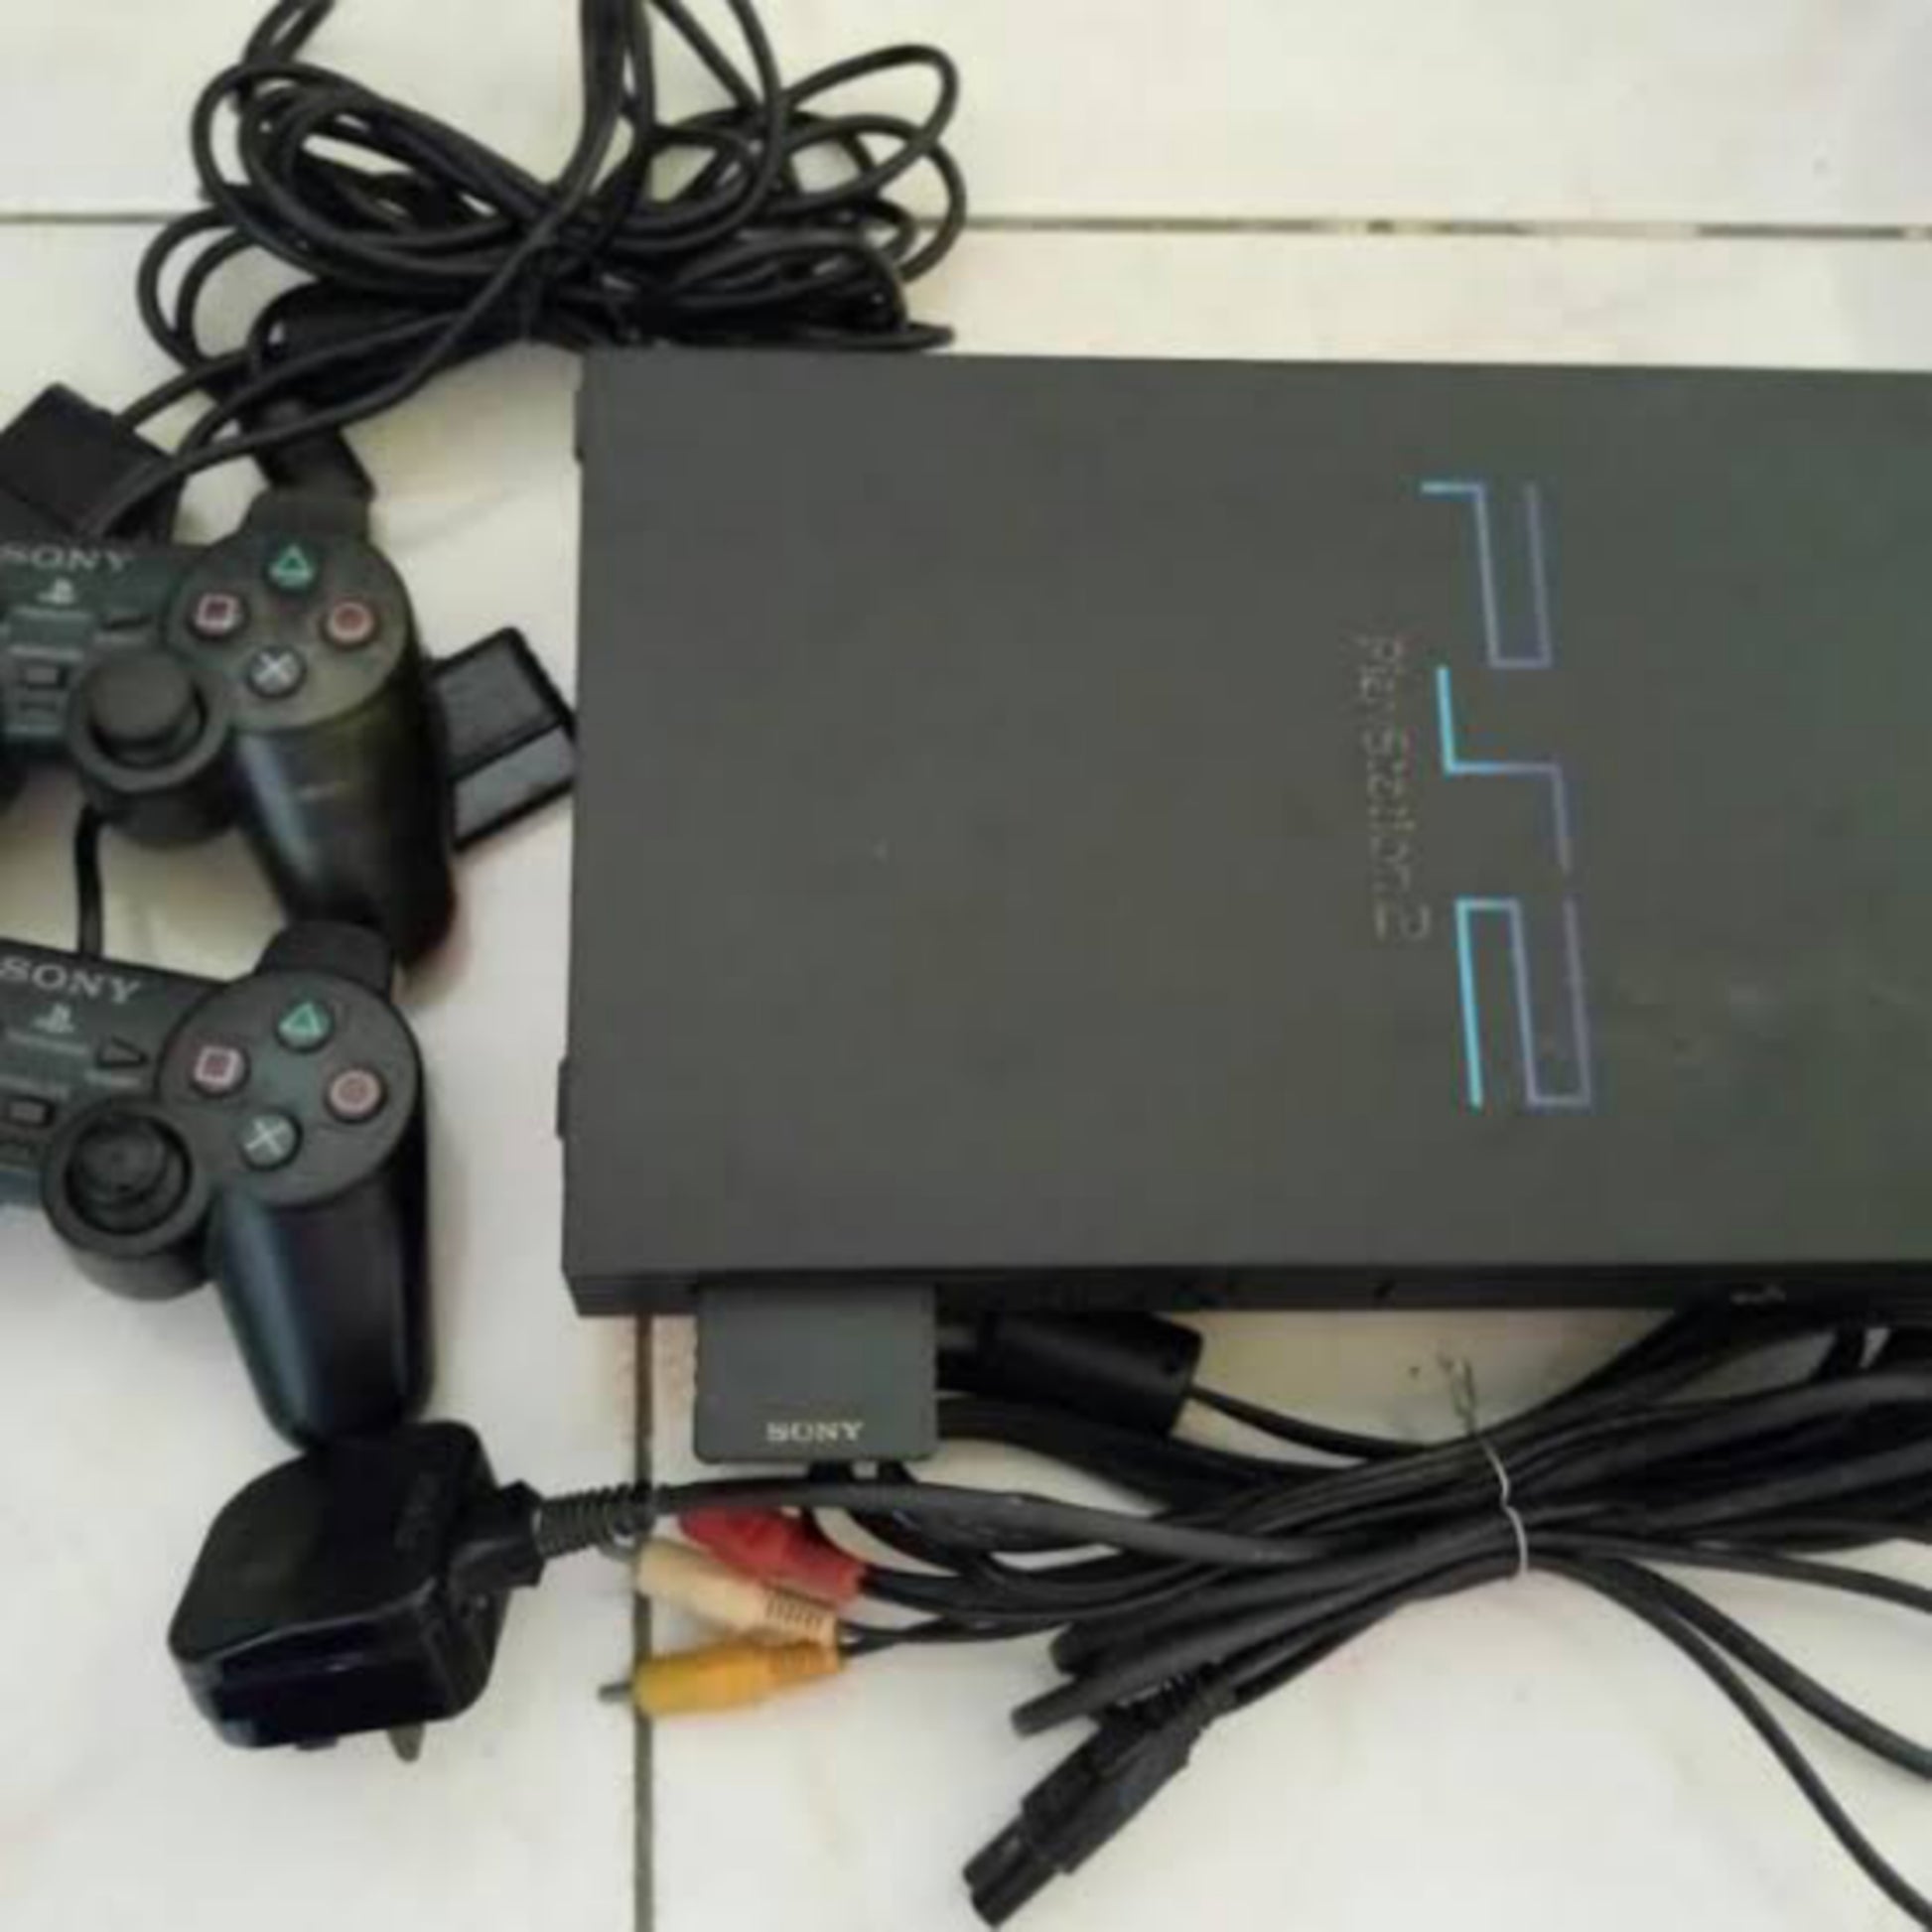 Sony Playstation 2 (PS2) Slim Game Console Complete Set with 2 DUALSHO –  IFESOLOX